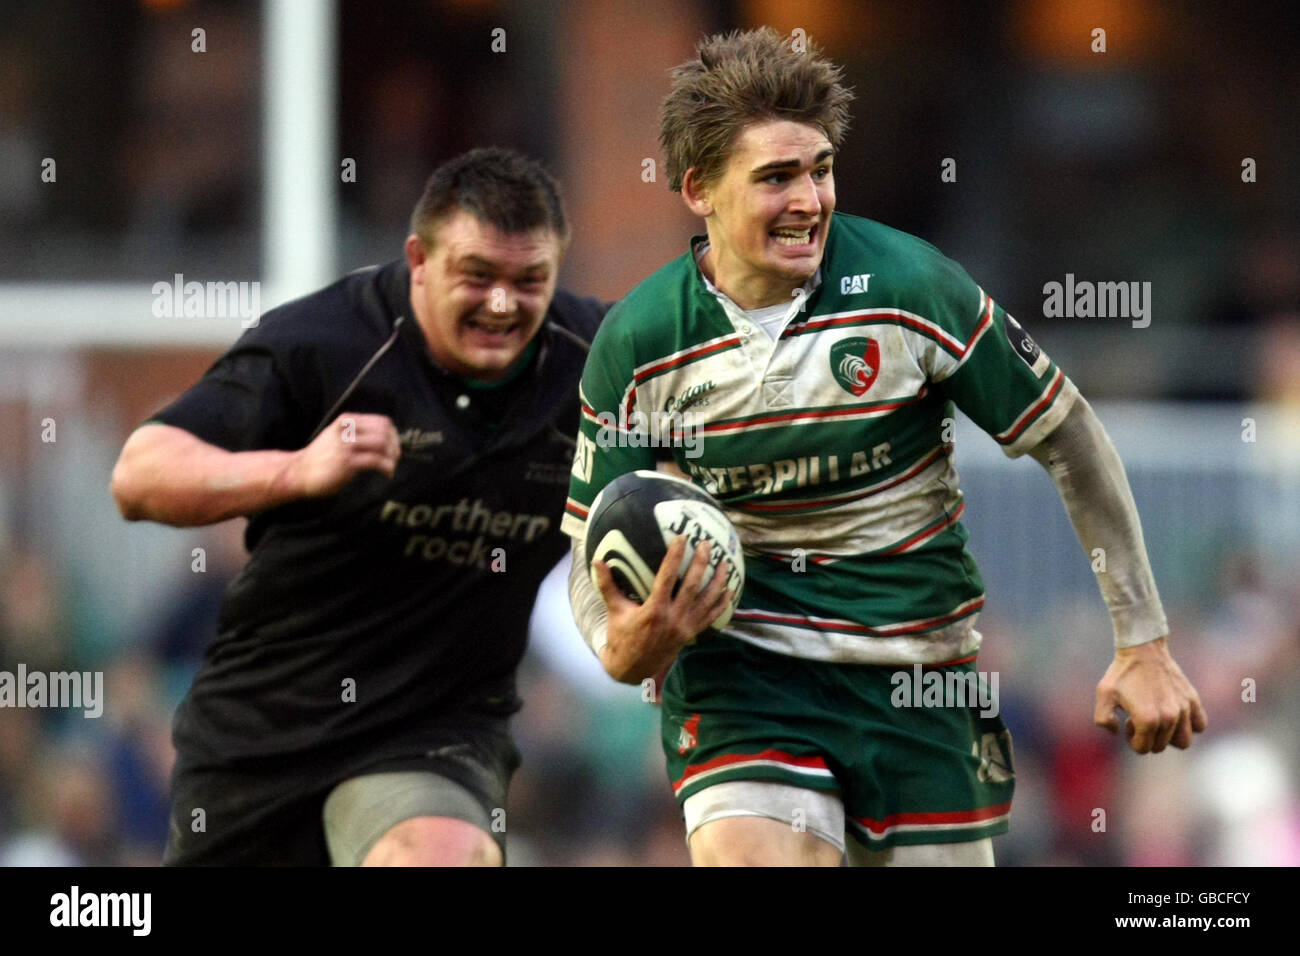 Rugby Union - Guinness Premiership - Leicester Tigers v Newcastle Falcons - Welford Road. Leicester Tigers' Toby Flood (right) in action against Newcastle Falcons. Stock Photo